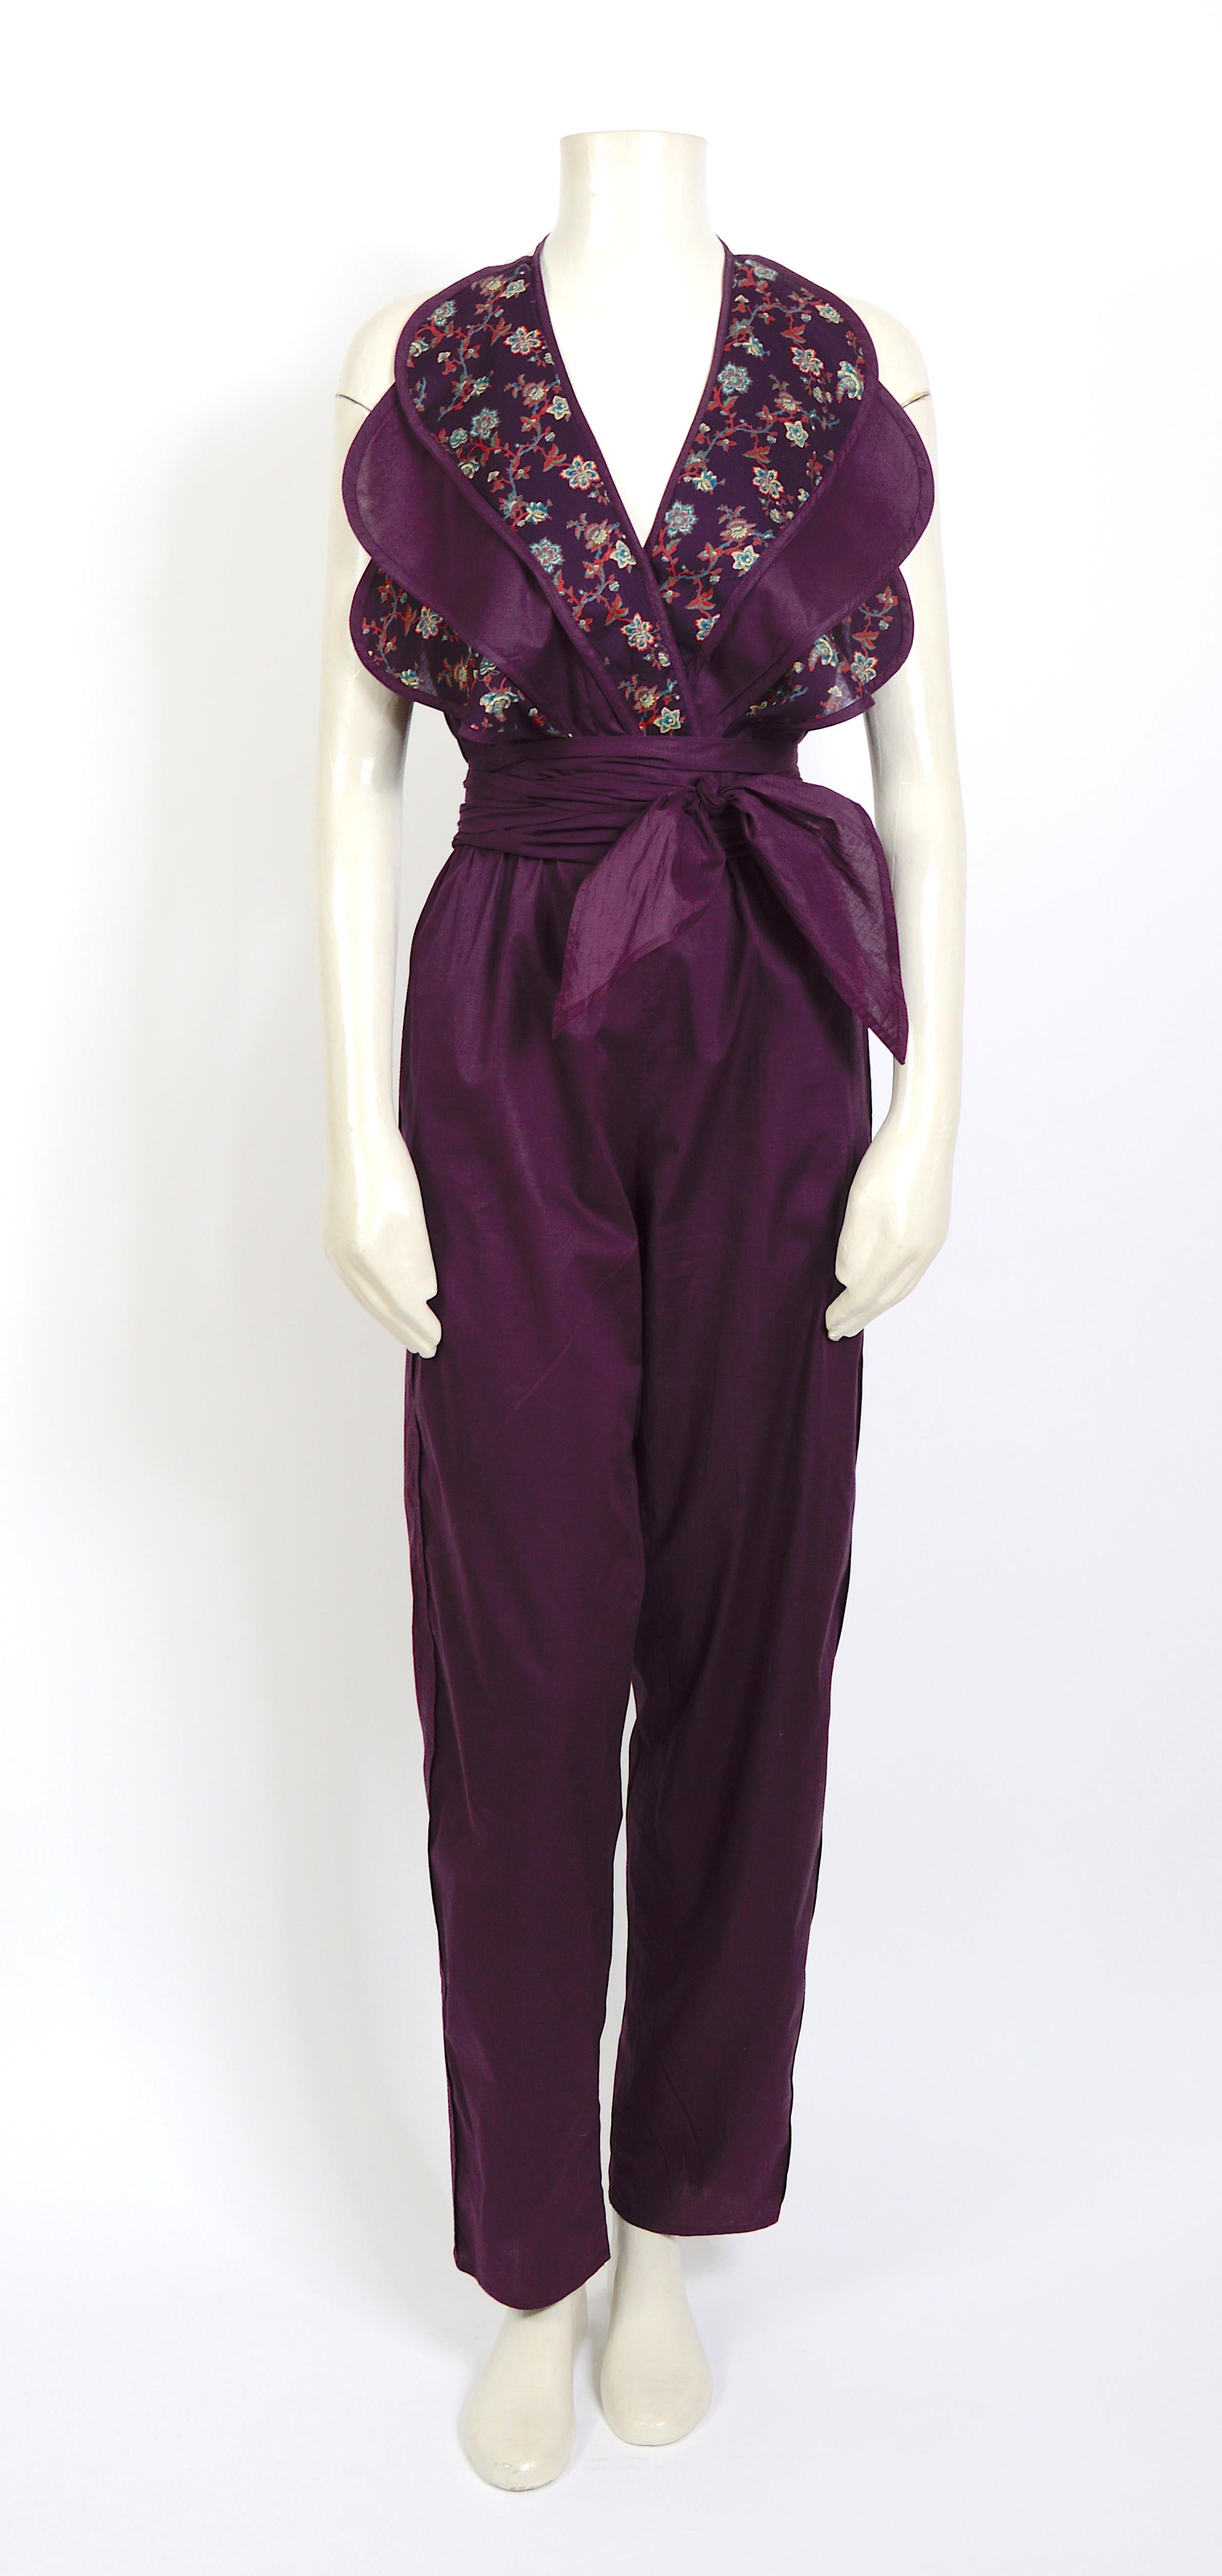 A beautiful Gianni Versace jumpsuit from the spring-summer 1982 collection
Made in light cotton.
No size label. Please use the given measurements.
Measurements taken flat - Waist without stretching 13inch/33cm(x2) - Bust Free -  Hip 23inch/53cm(x2)